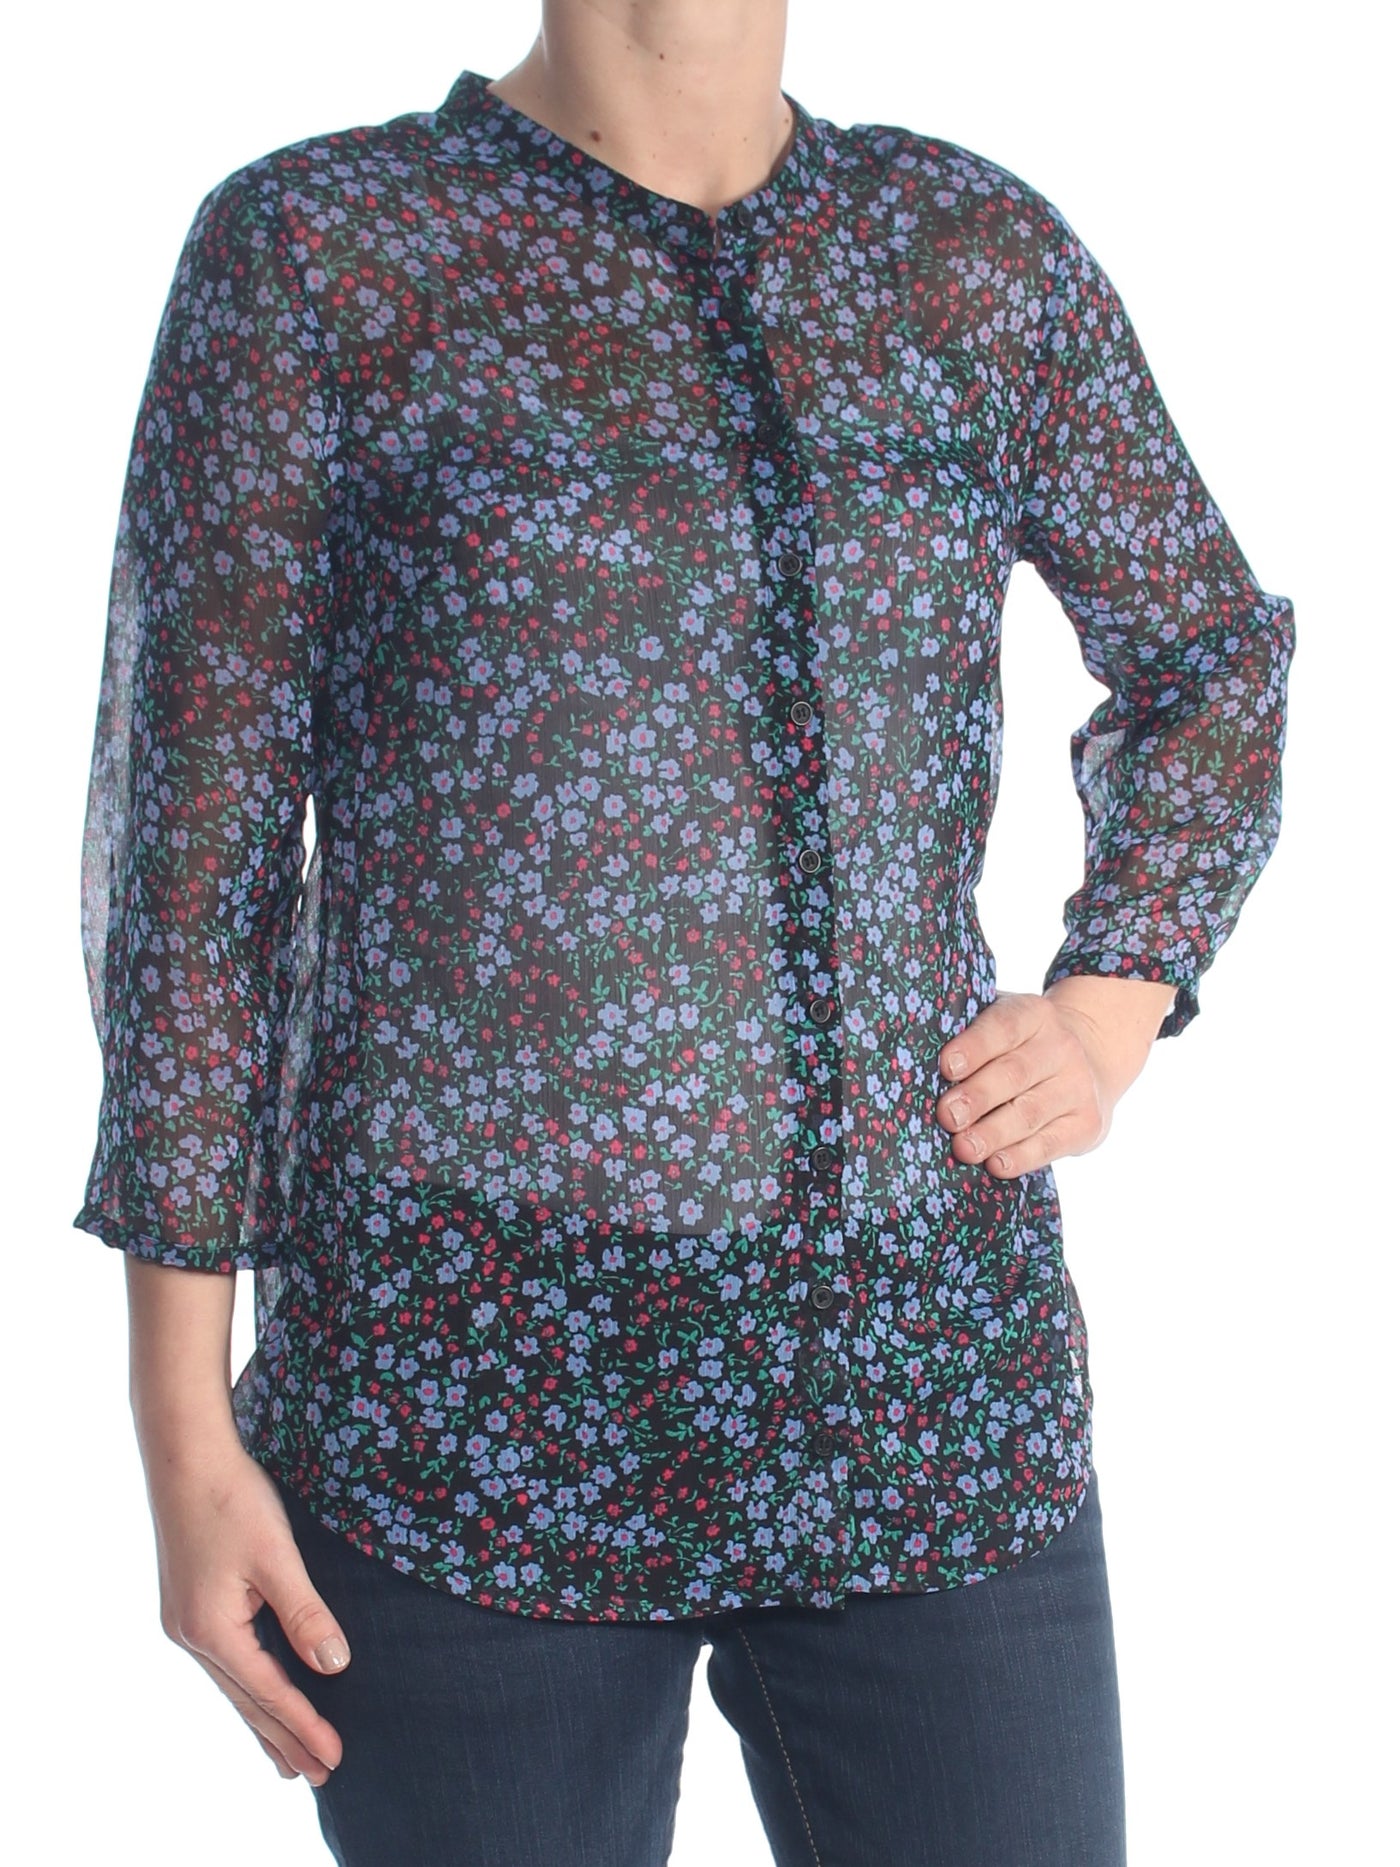 FRENCH CONNECTION Womens Black Sheer Floral 3/4 Sleeve Button Up Top